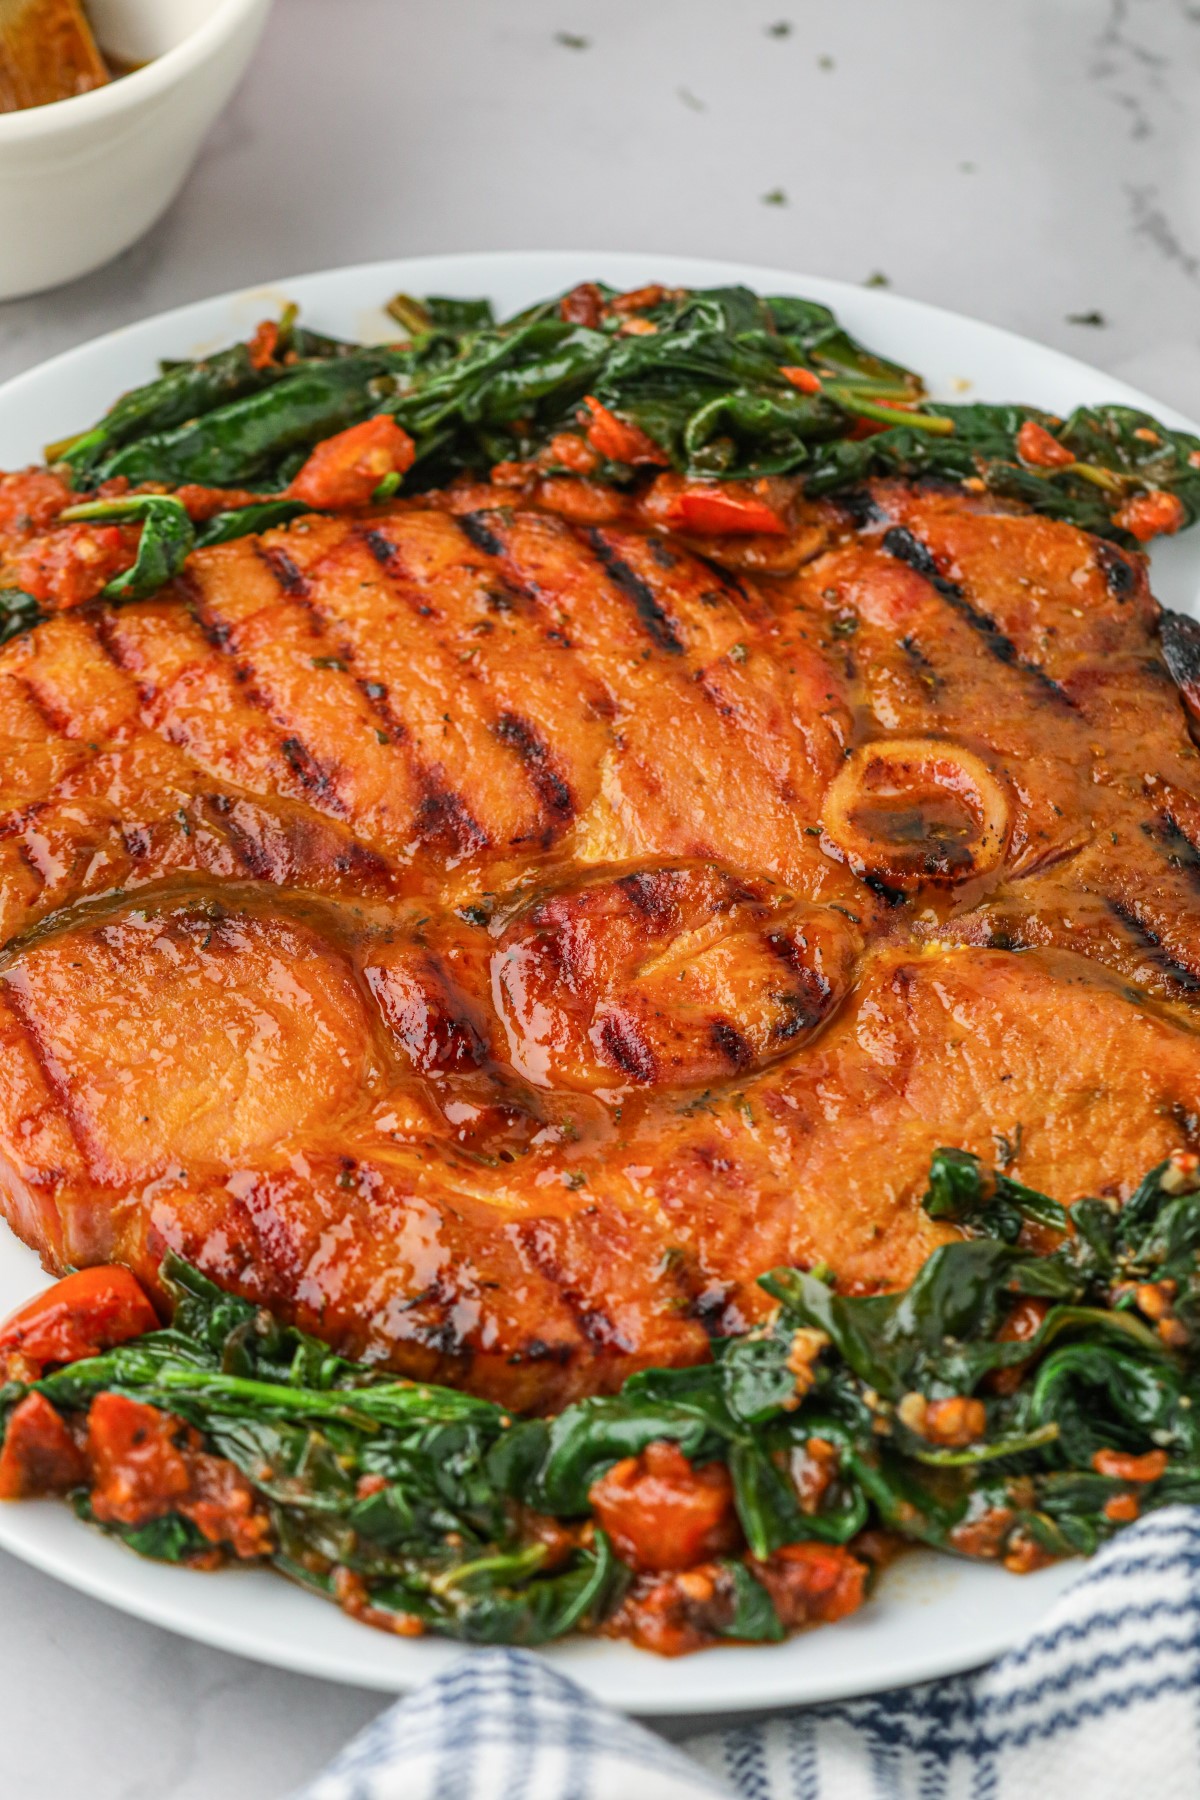 Grilled ham steak on a serving platter with sautéed spinach and tomatoes.